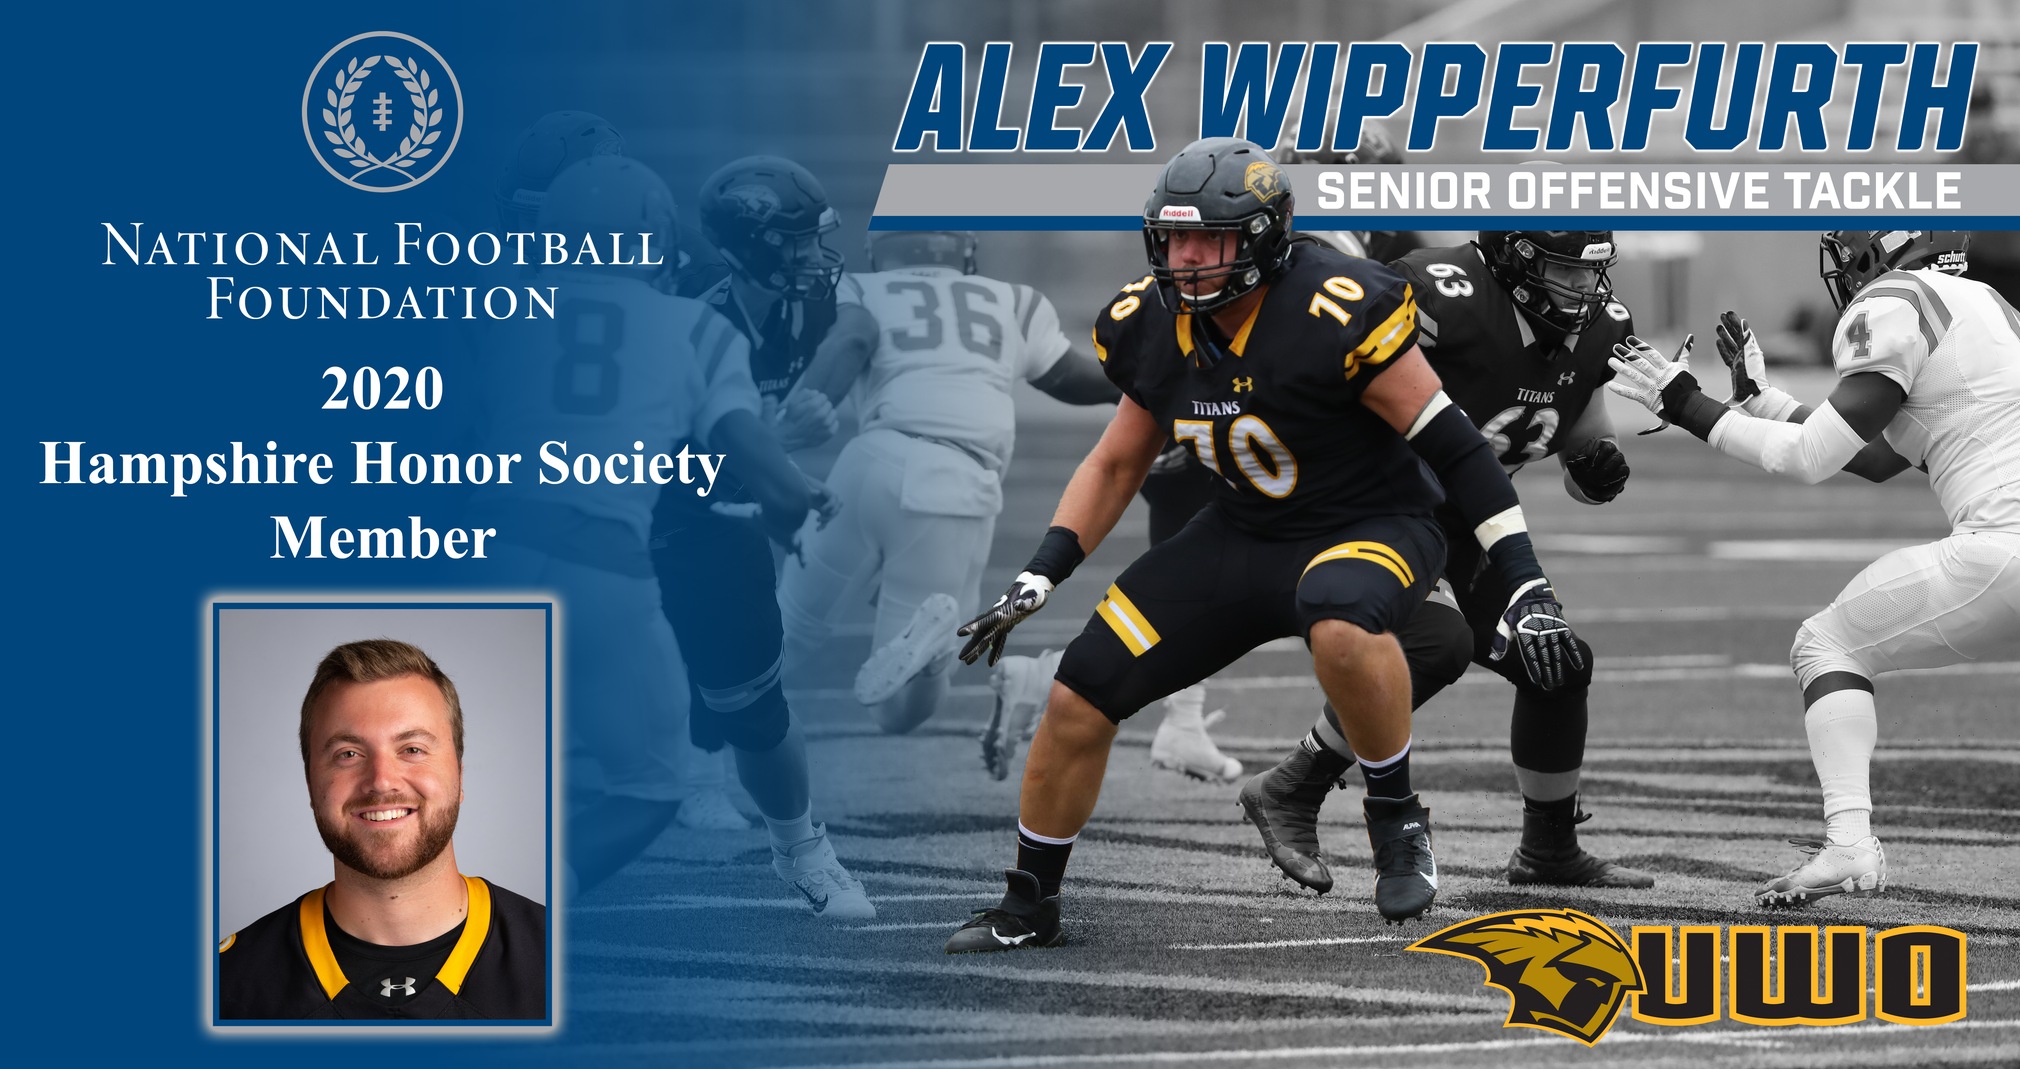 Wipperfurth Named To National Football Foundation's Honor Society